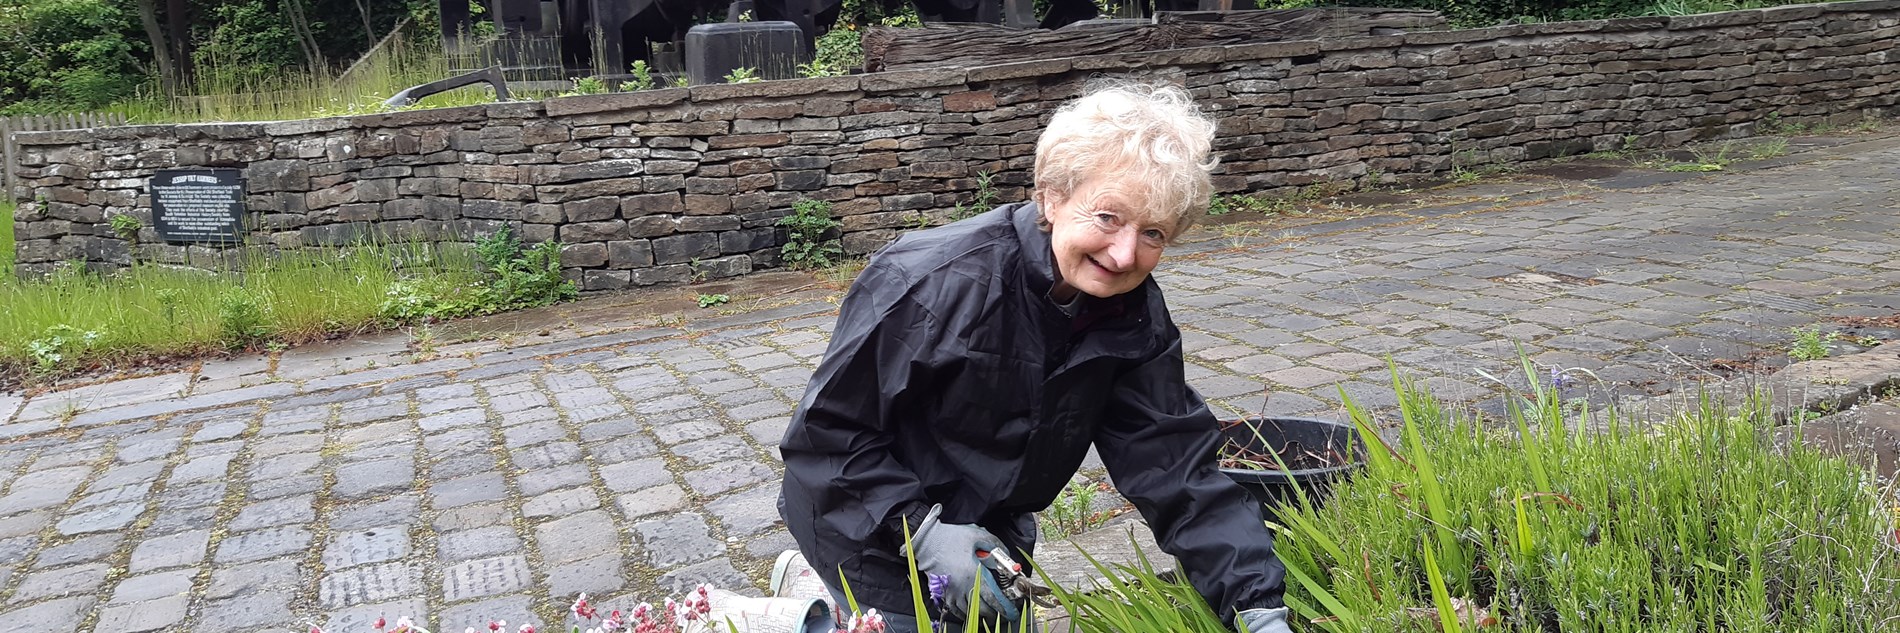 A smiling adult gardening on a cobbled walkway, in front of a cobbled wall. Some historic engineering equipment can be seen in the background 